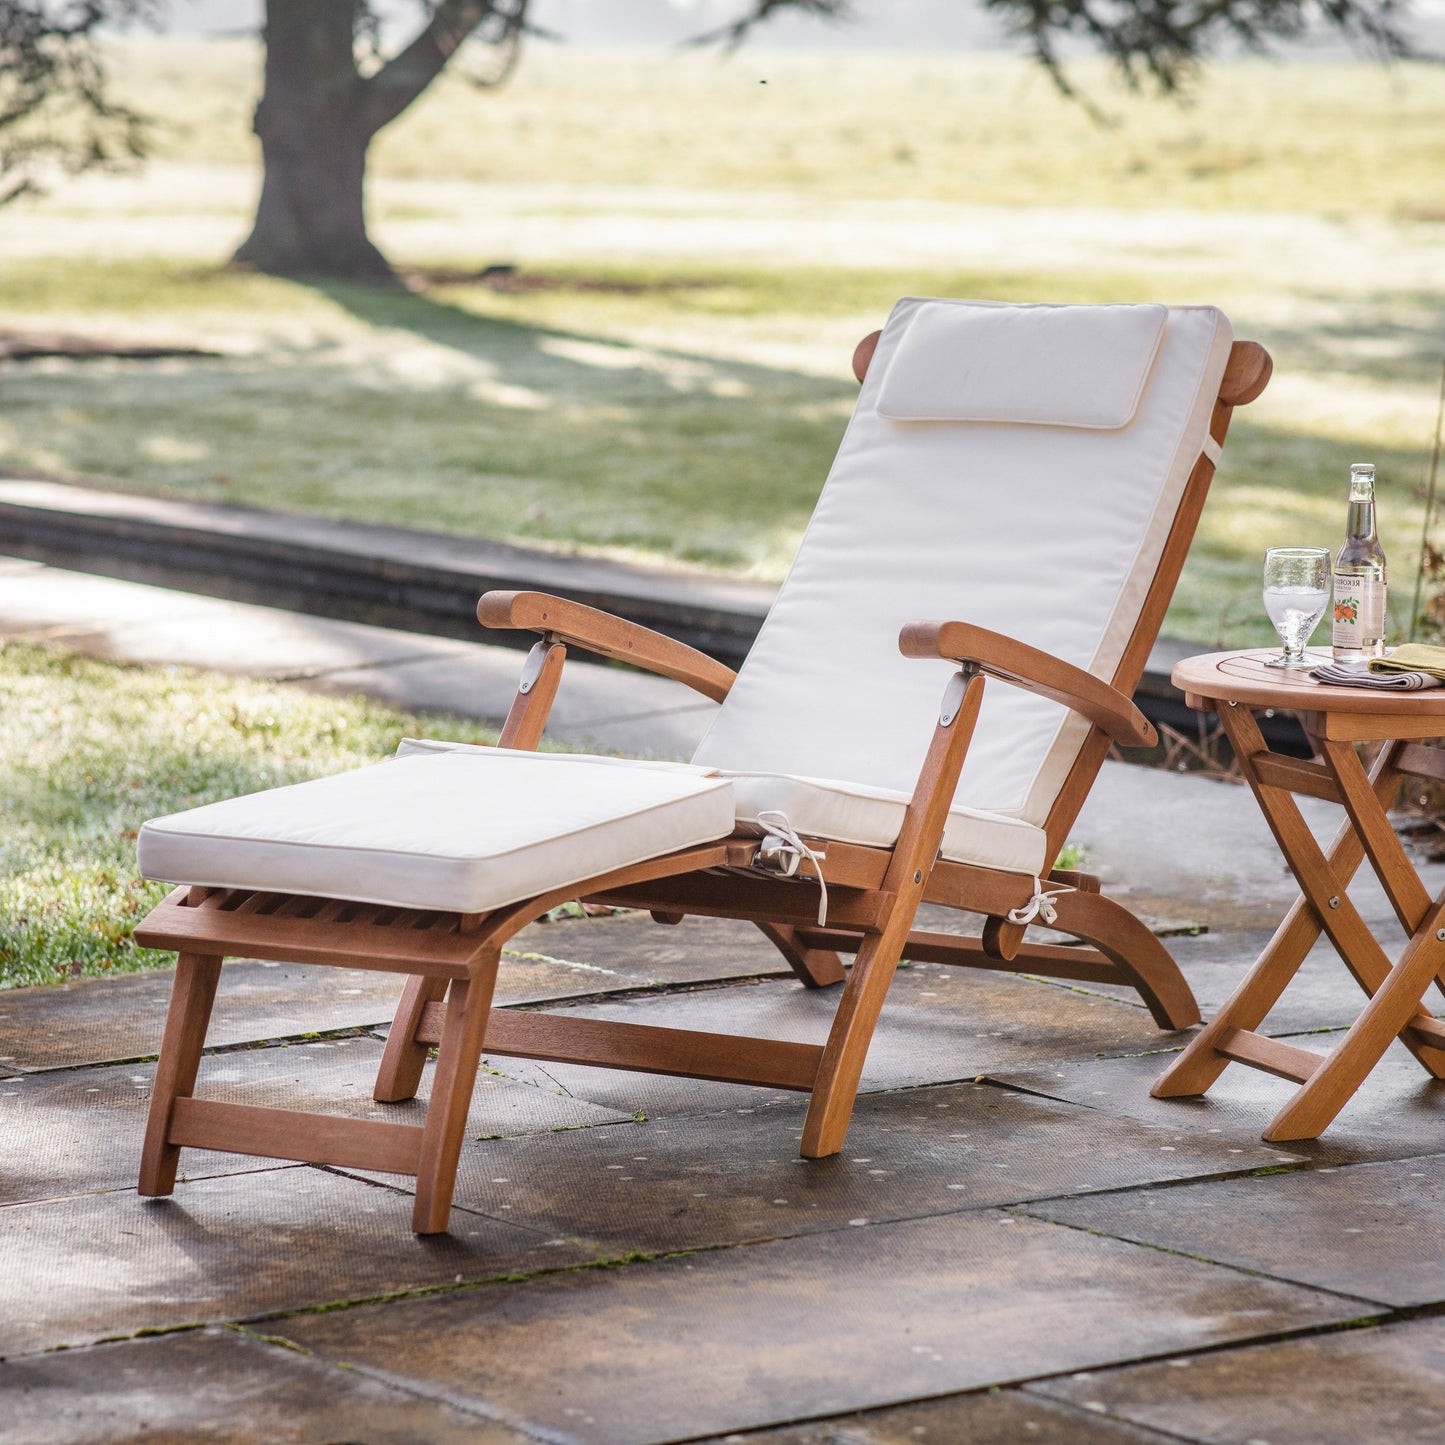 A Bickington Outdoor Lounger and table perfect for interior decor and home furniture, available at Kikiathome.co.uk.